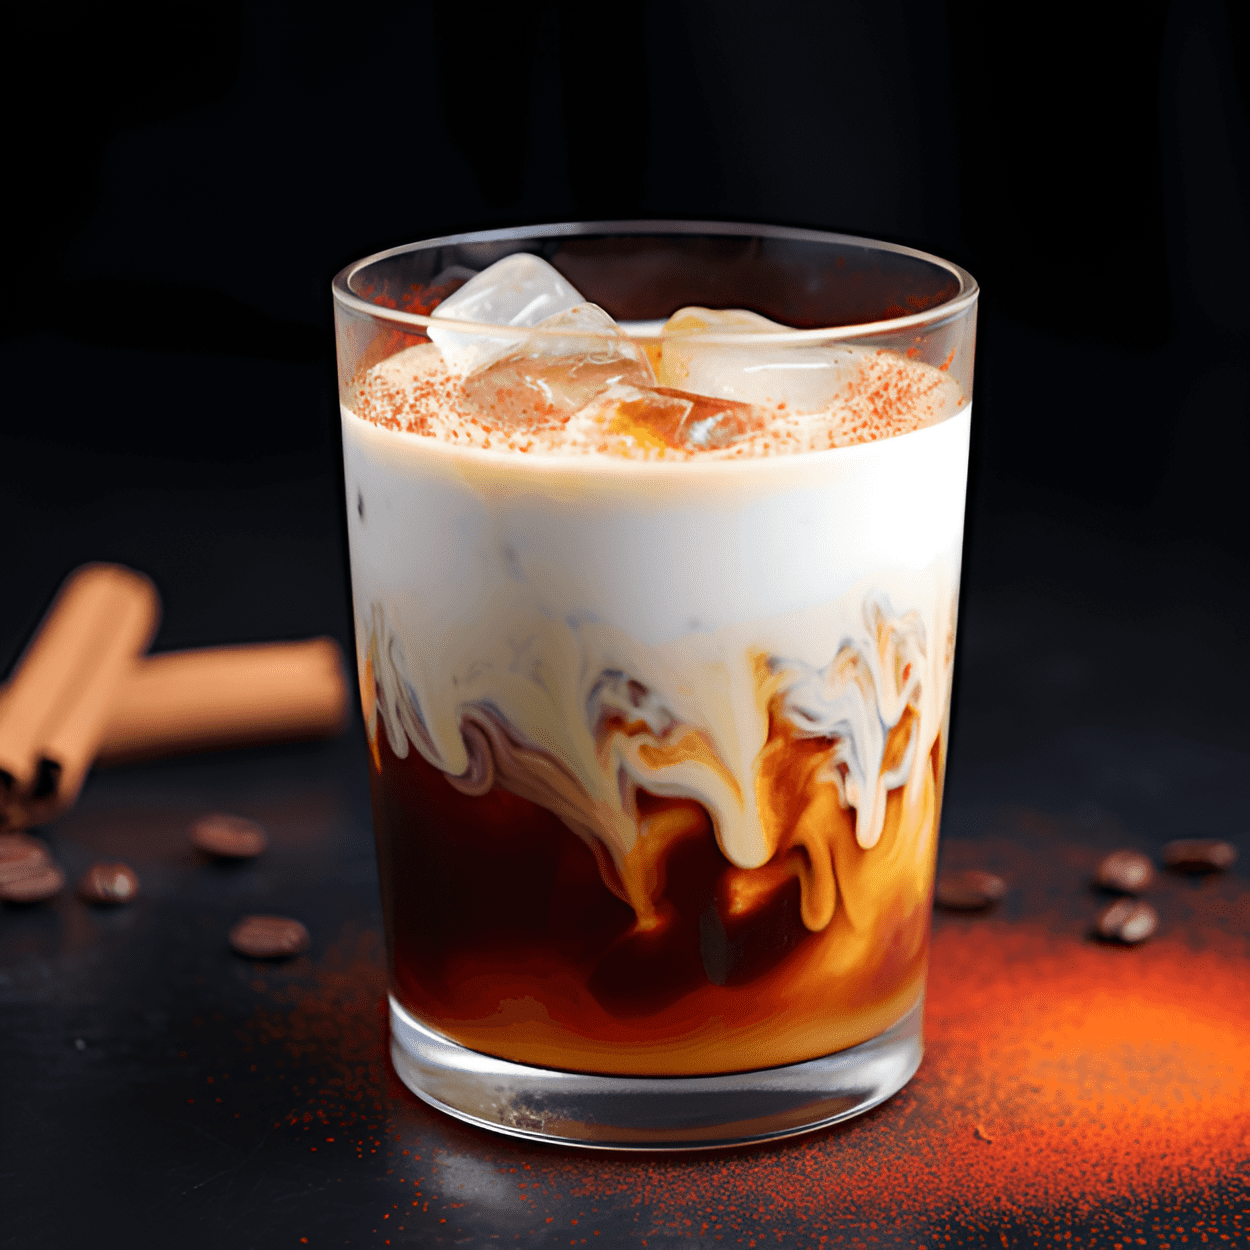 Dirty Mexican Cocktail Recipe - The Dirty Mexican is a rich, creamy, and slightly spicy cocktail. It has a strong coffee flavor from the Kahlua, which is balanced by the creamy sweetness of the cream. The tequila adds a bit of a kick, while the Tabasco sauce gives it a spicy finish.